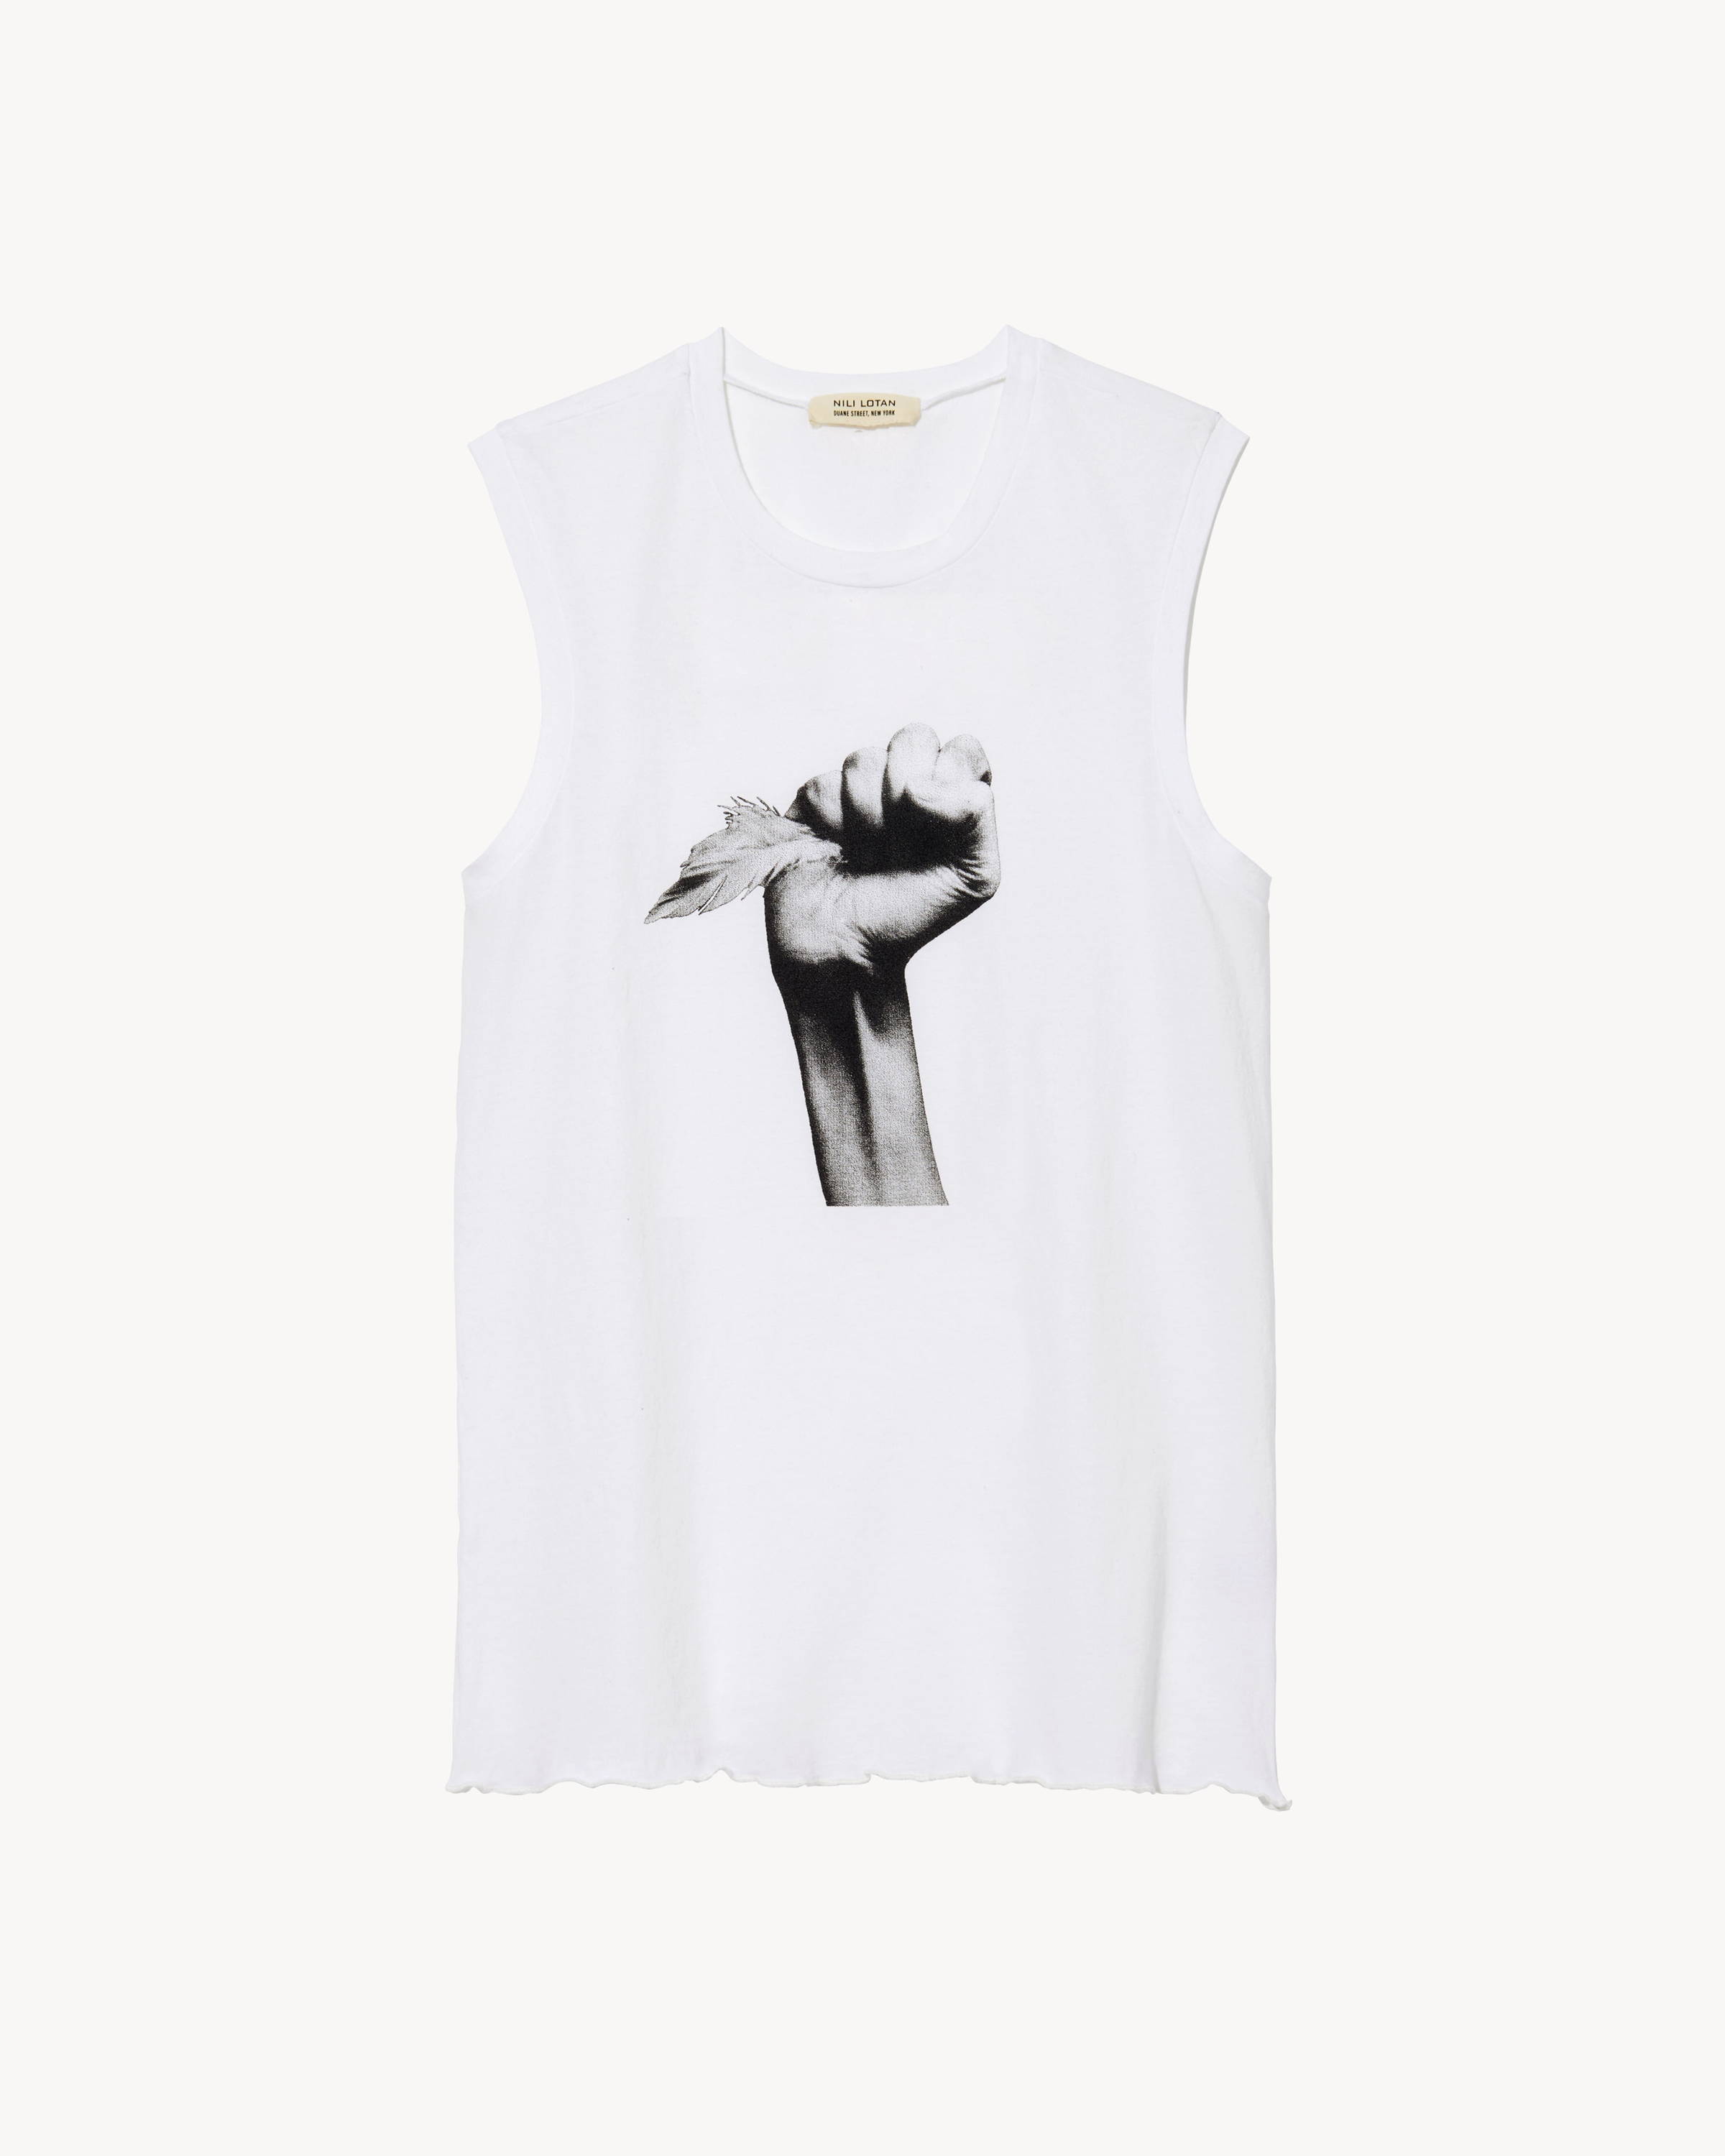 A white tank with a black and white image of a hand holding a feather.